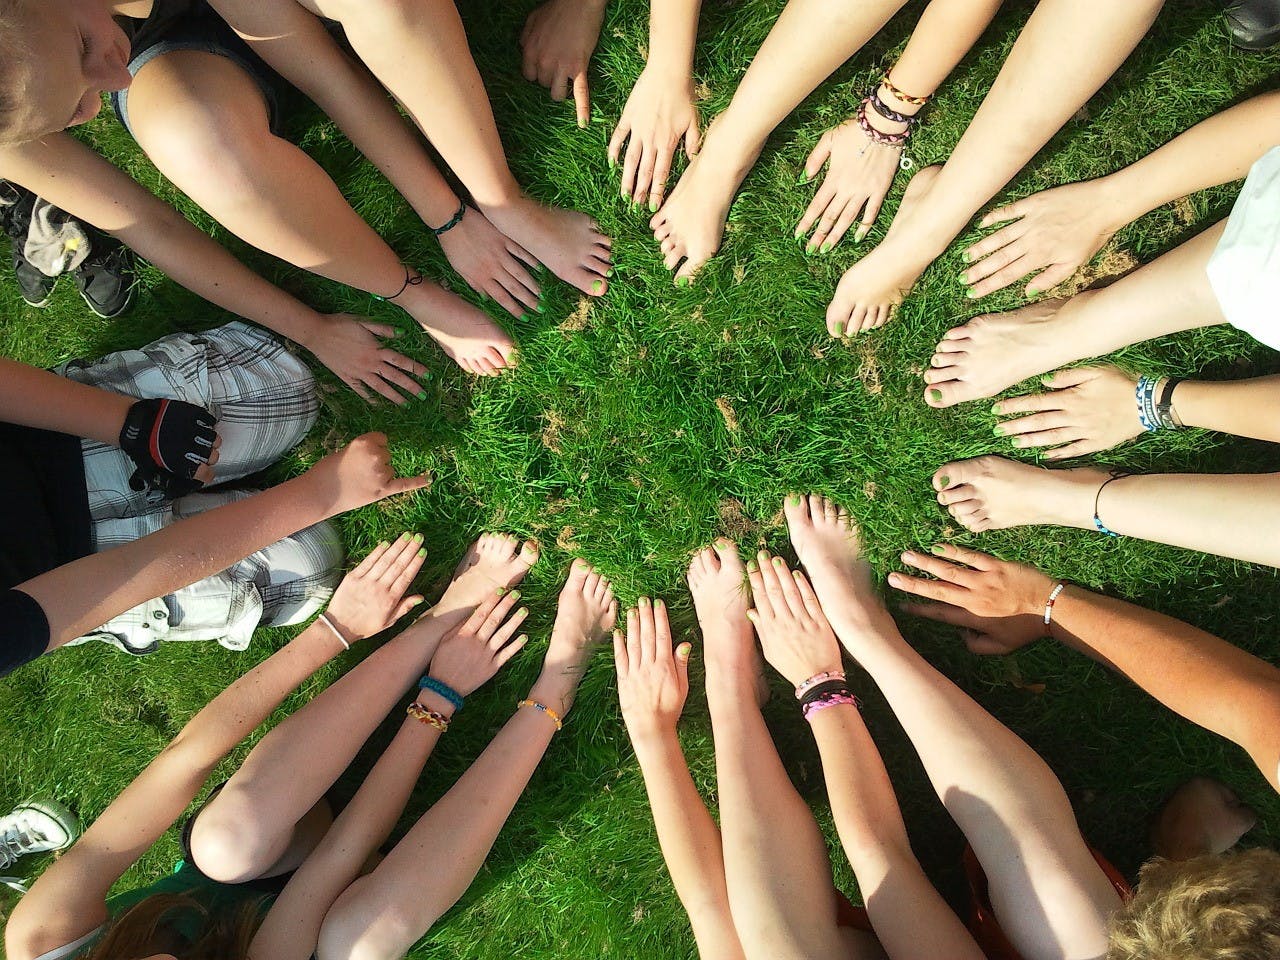 Several people with their feet and hands out forming a circle in the grass.